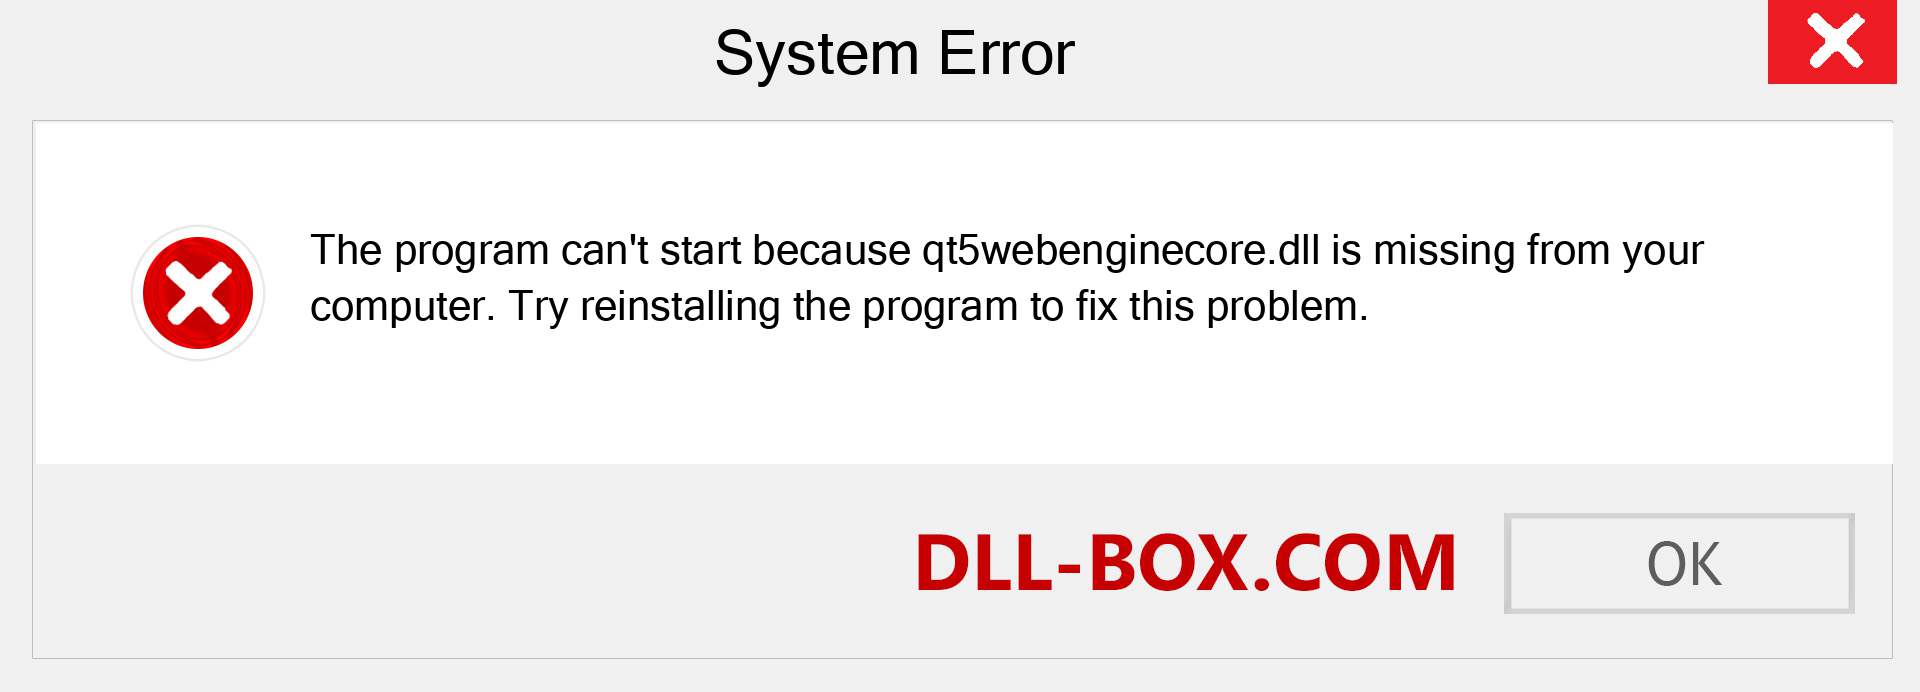  qt5webenginecore.dll file is missing?. Download for Windows 7, 8, 10 - Fix  qt5webenginecore dll Missing Error on Windows, photos, images